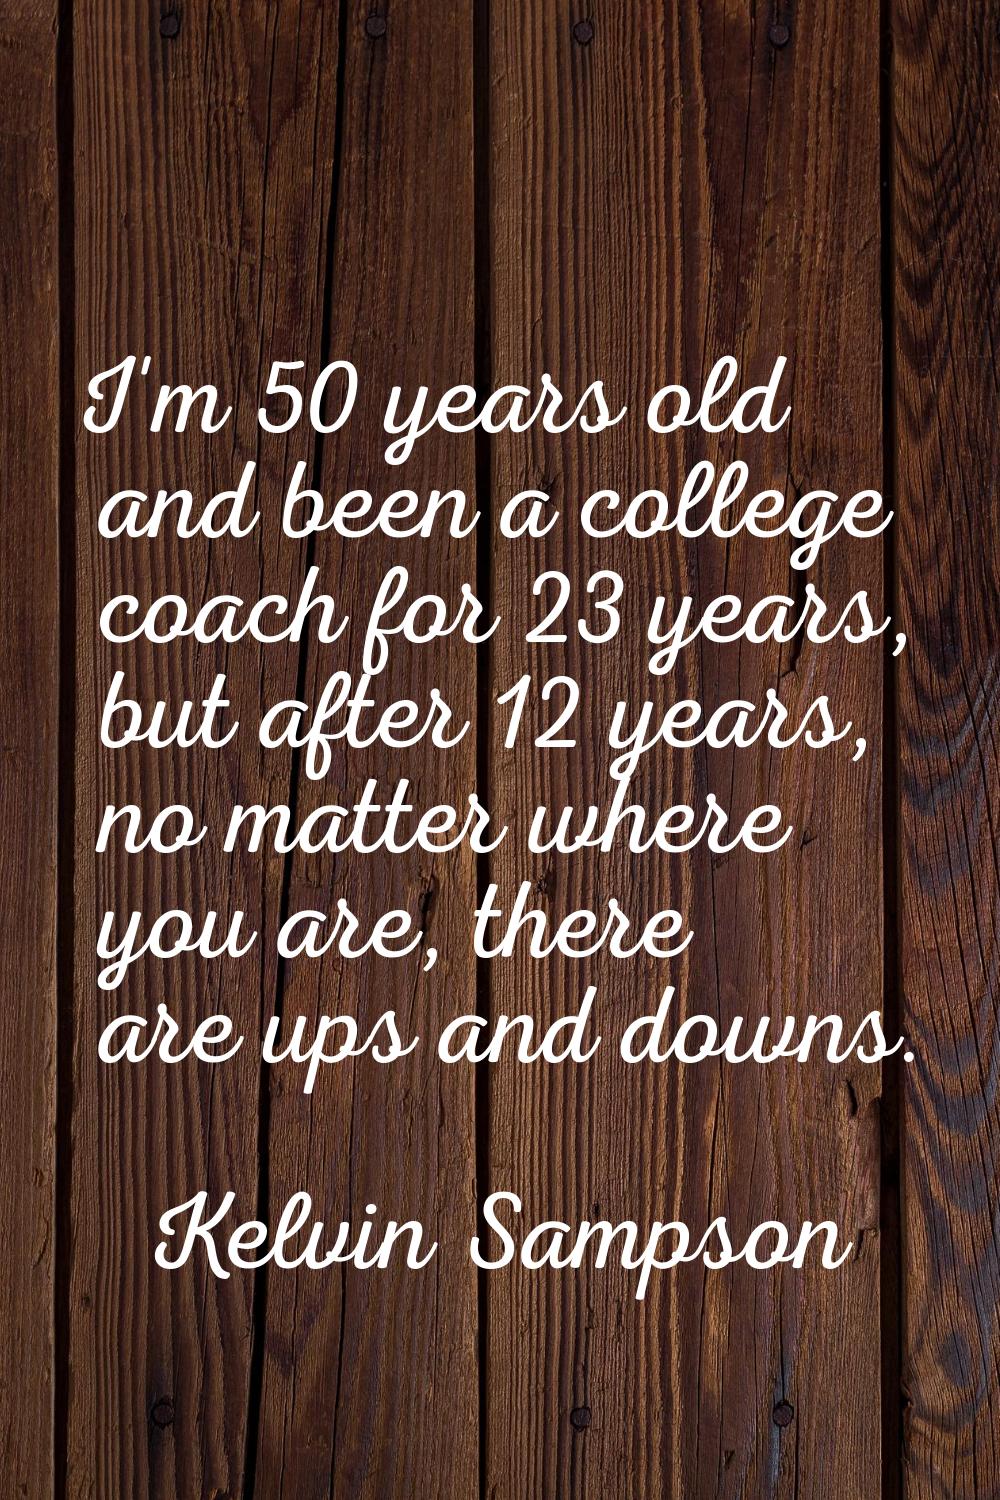 I'm 50 years old and been a college coach for 23 years, but after 12 years, no matter where you are